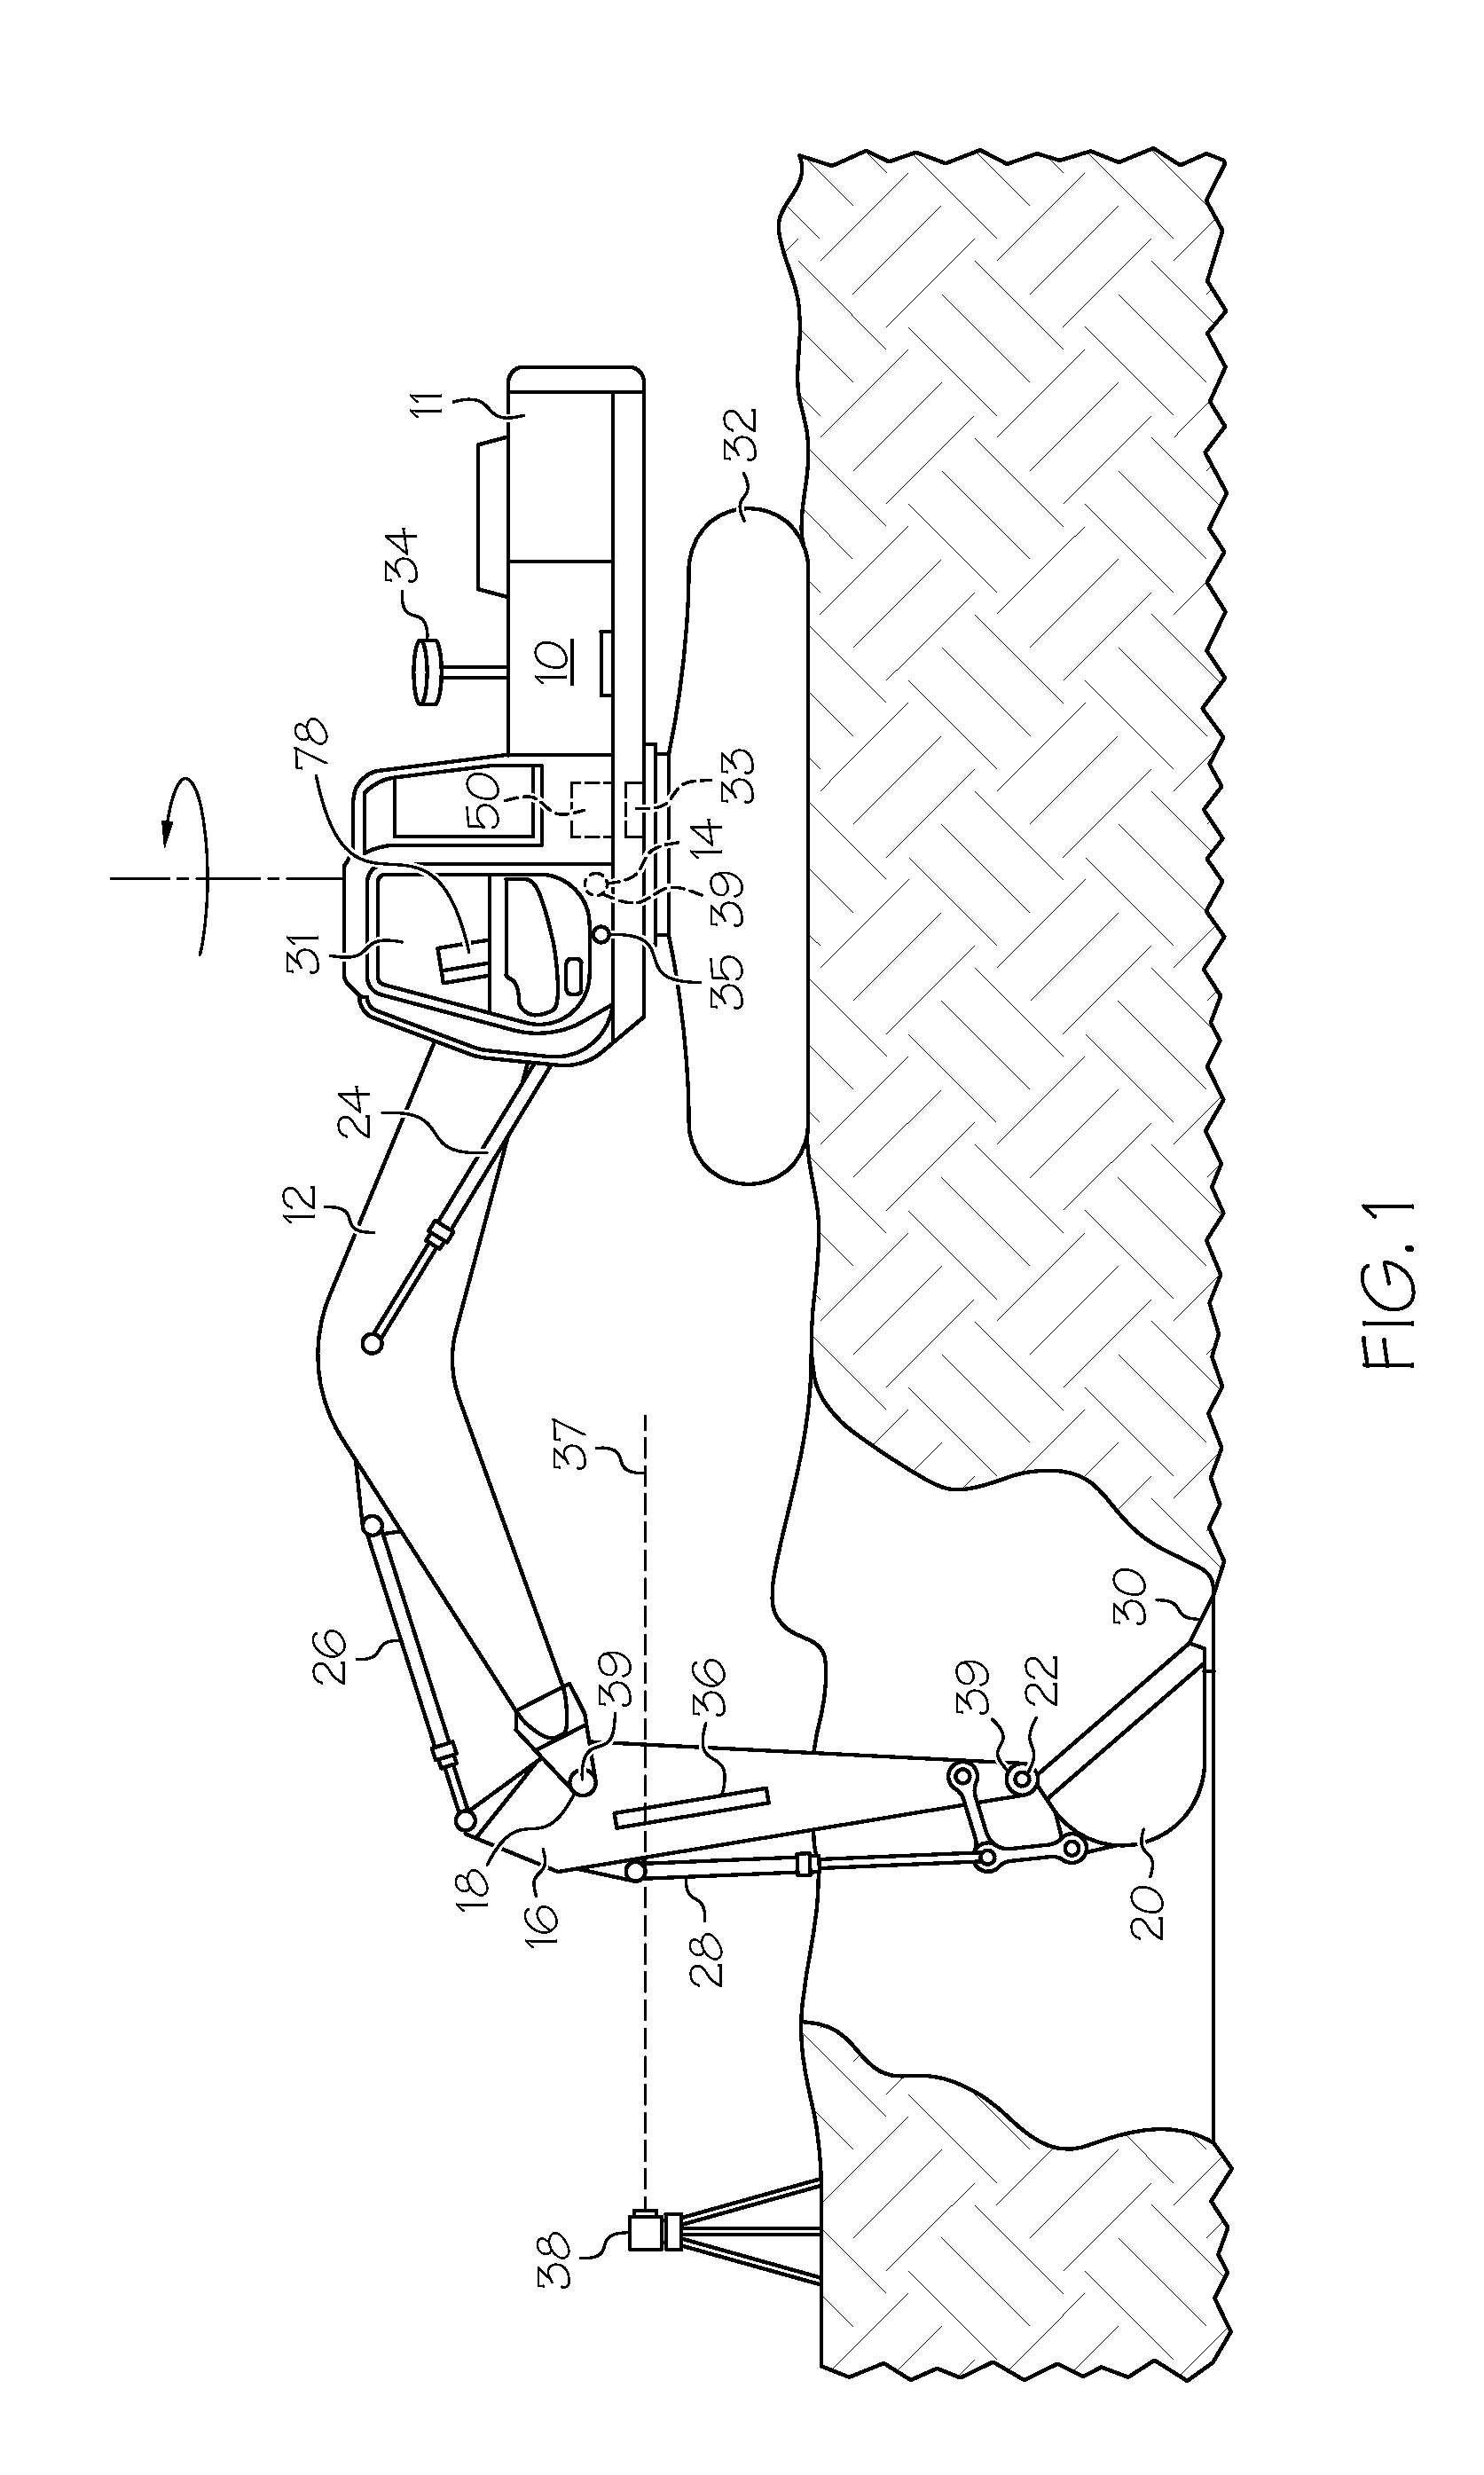 Method and system for controlling an excavator